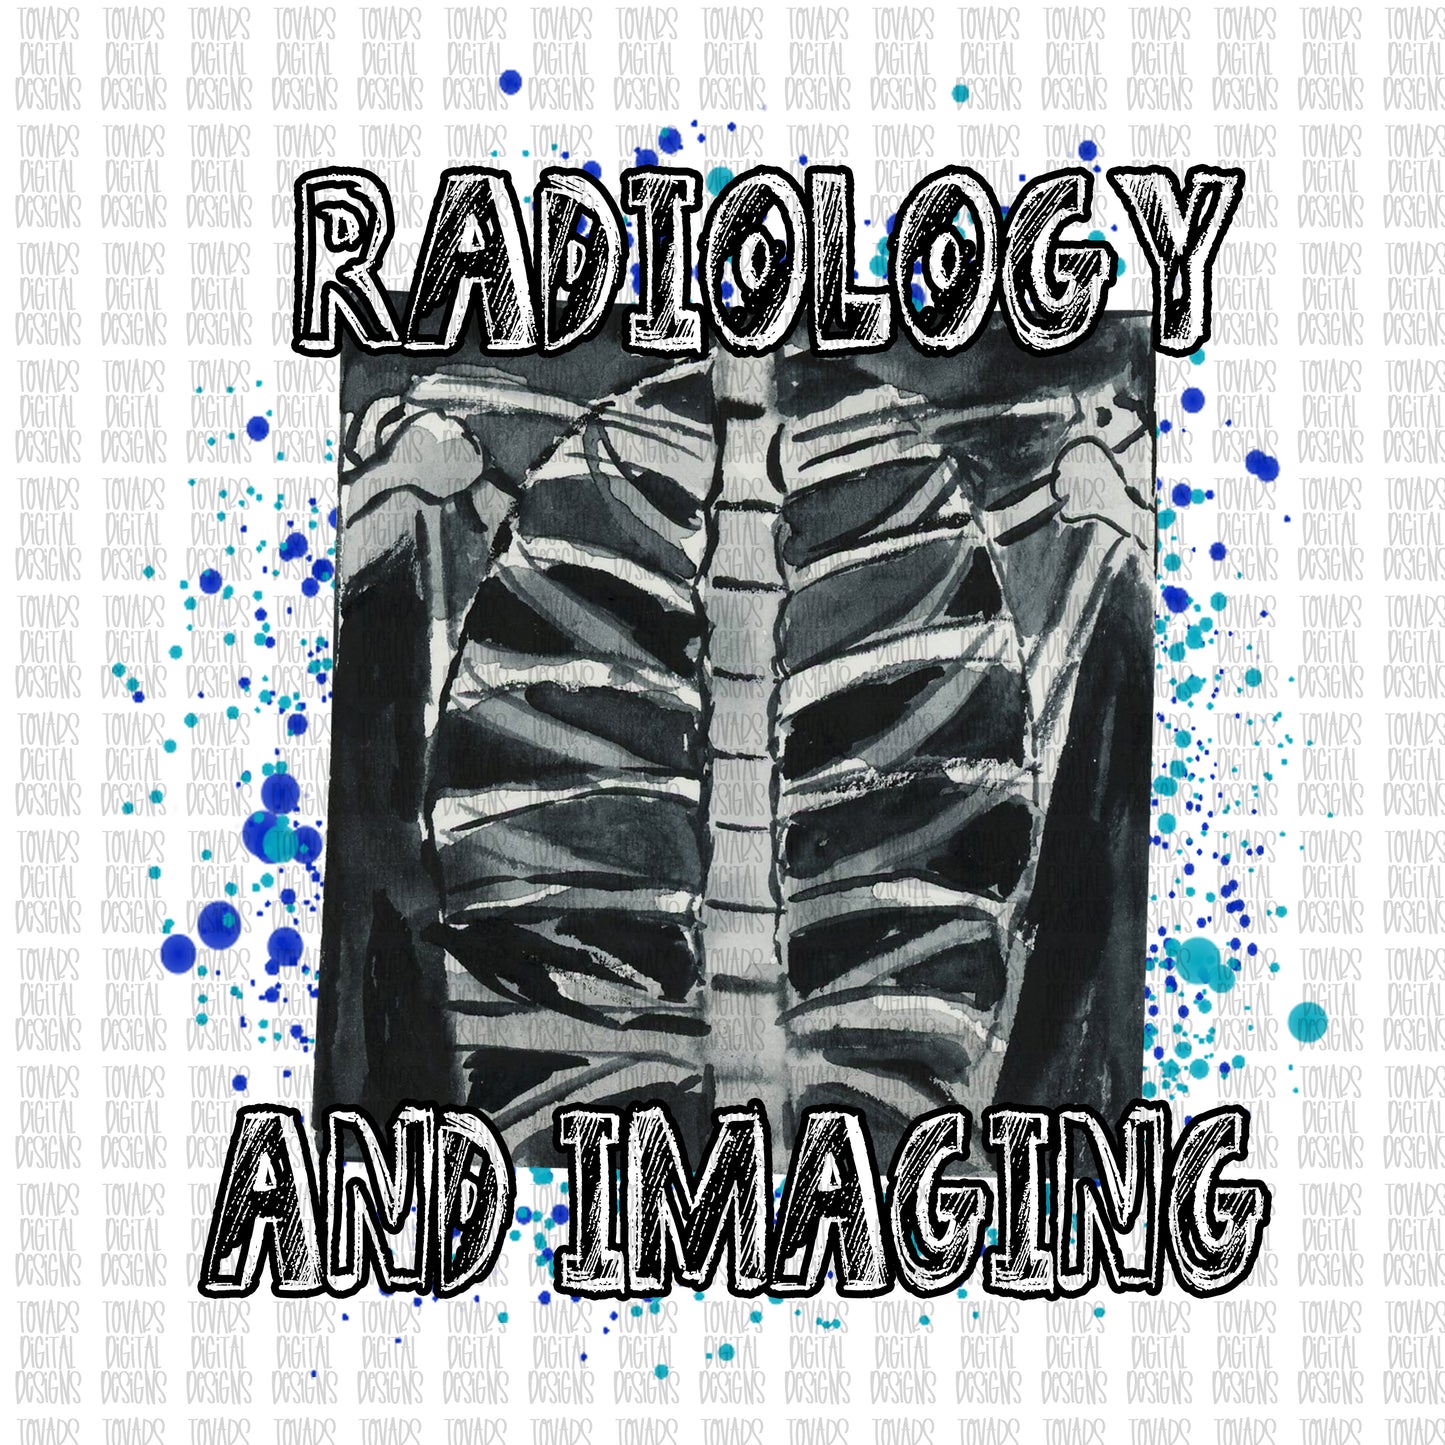 Radiology and imaging Sublimation Download, Radiology and imaging PNG, Sublimation Download, x-ray tech PNG, radiology sublimation design